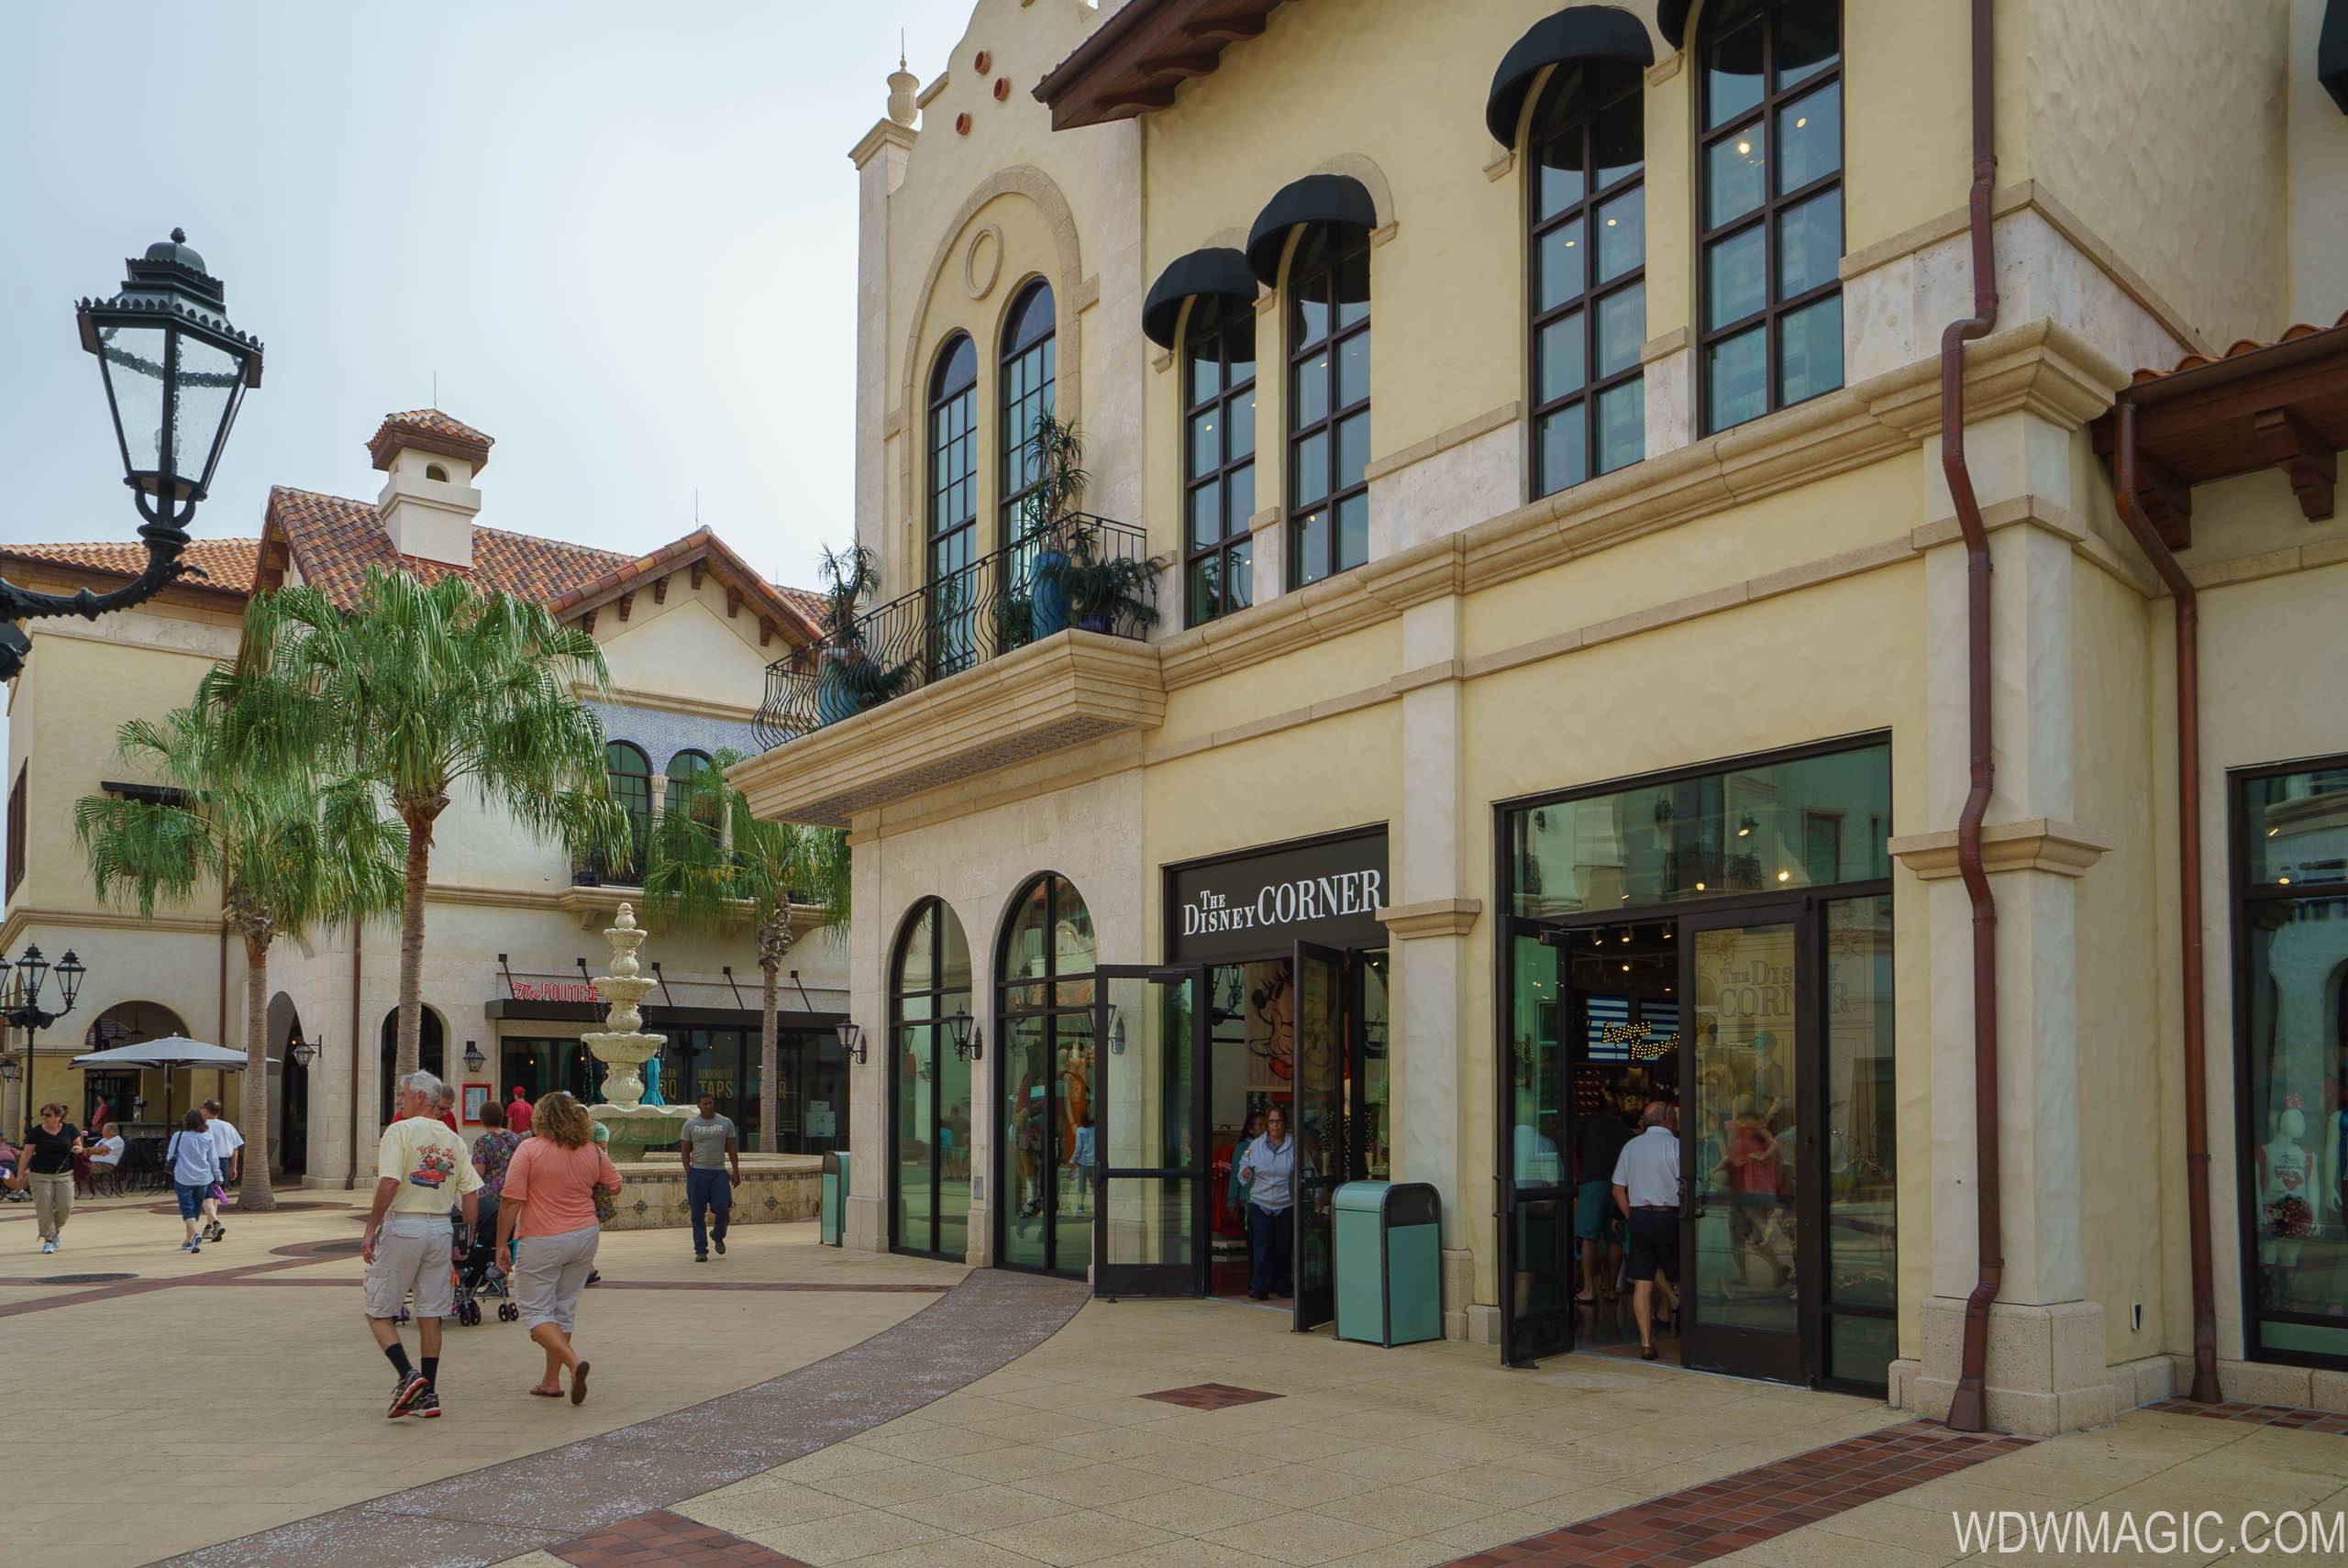 The Disney Corner at Disney Springs to close later this month